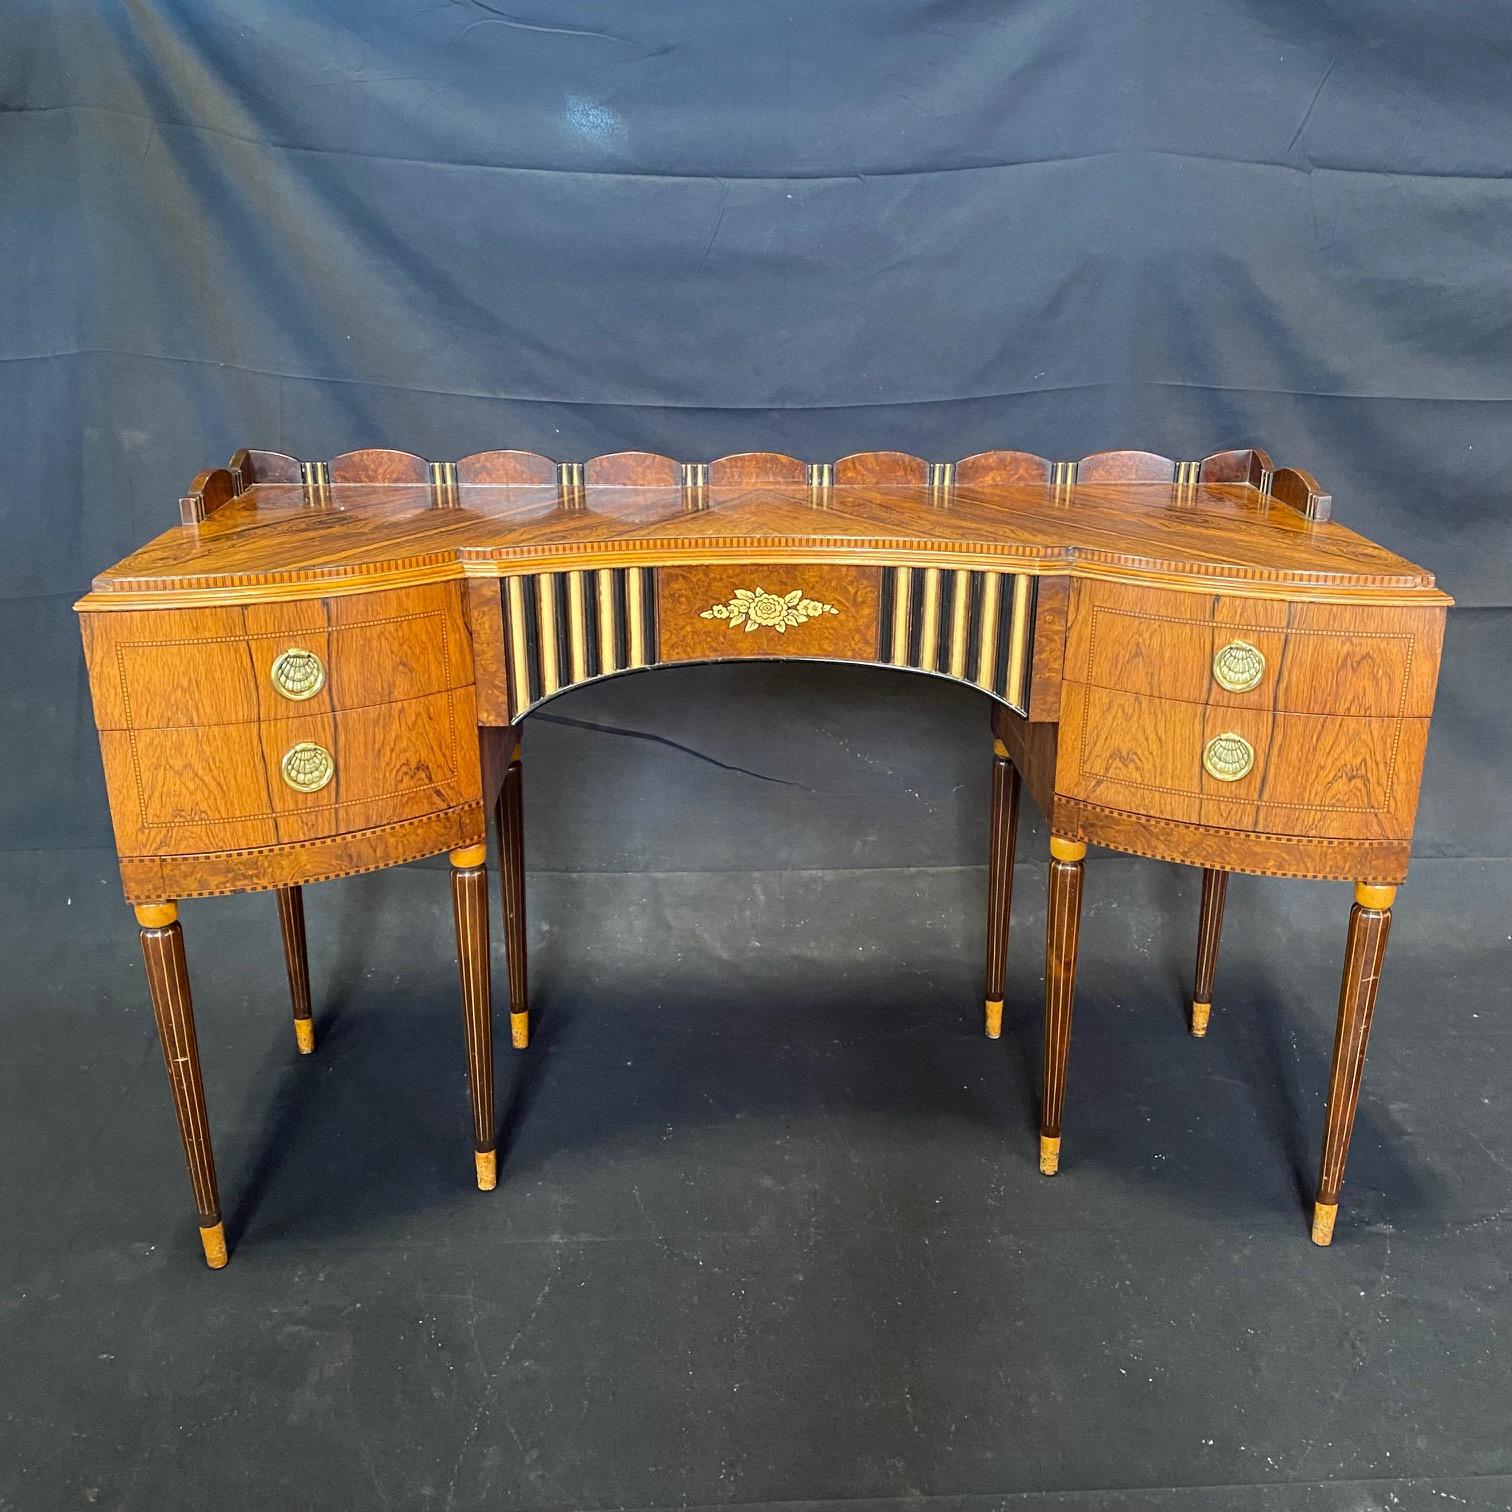 An elegant, stately, hand painted rosewood dressing table and matching chair in great condition from the famous Robert W. Irwin furniture company. This was probably made between 1920-1933 after artist Frank J. Davidhazy was hired to come from NYC to